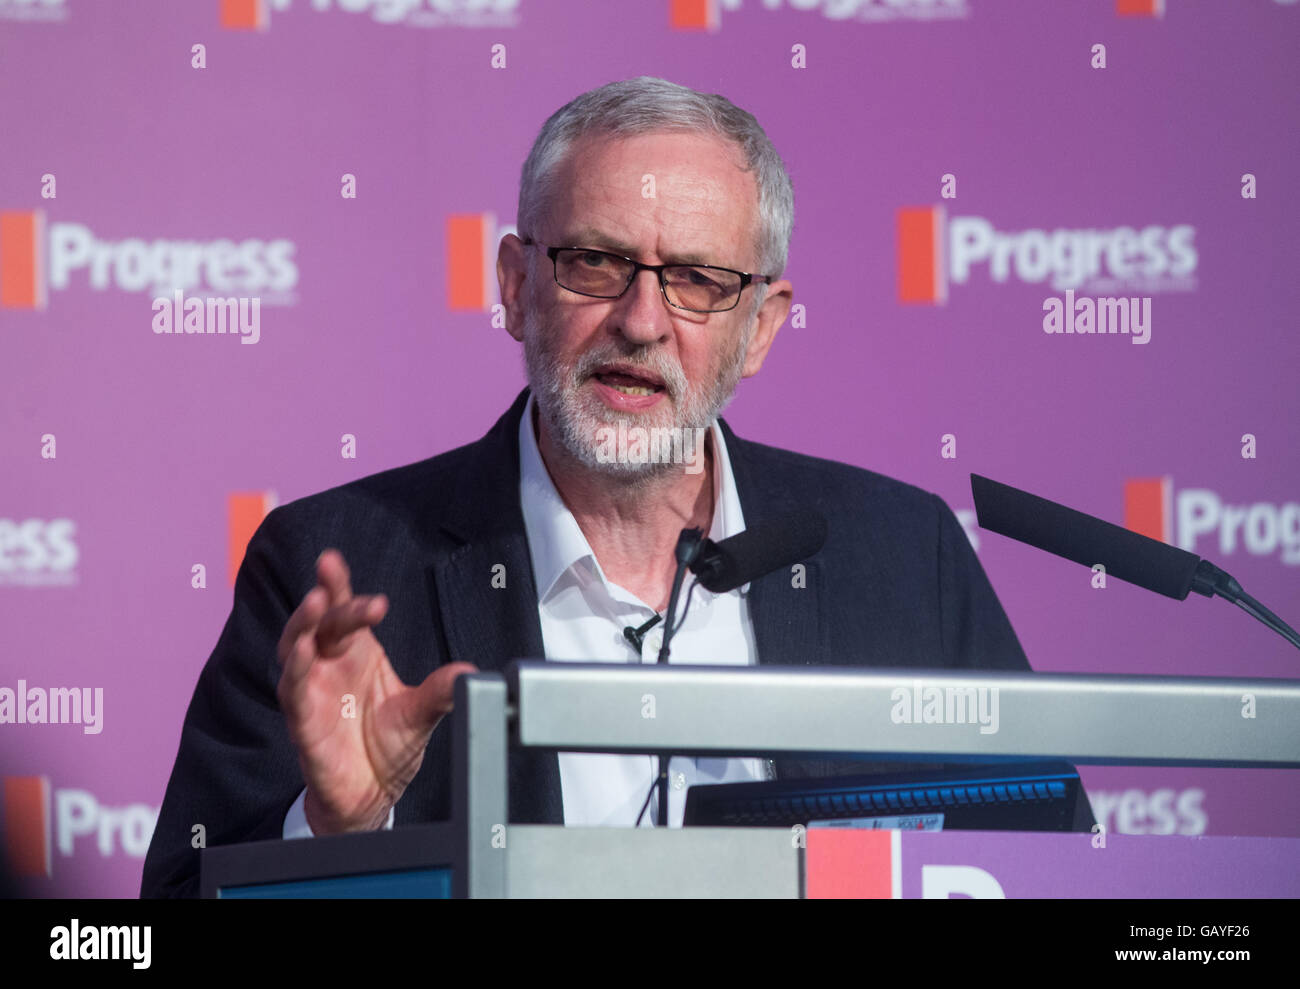 Labour leader,Jeremy Corbyn,speaking at an event in London Stock Photo